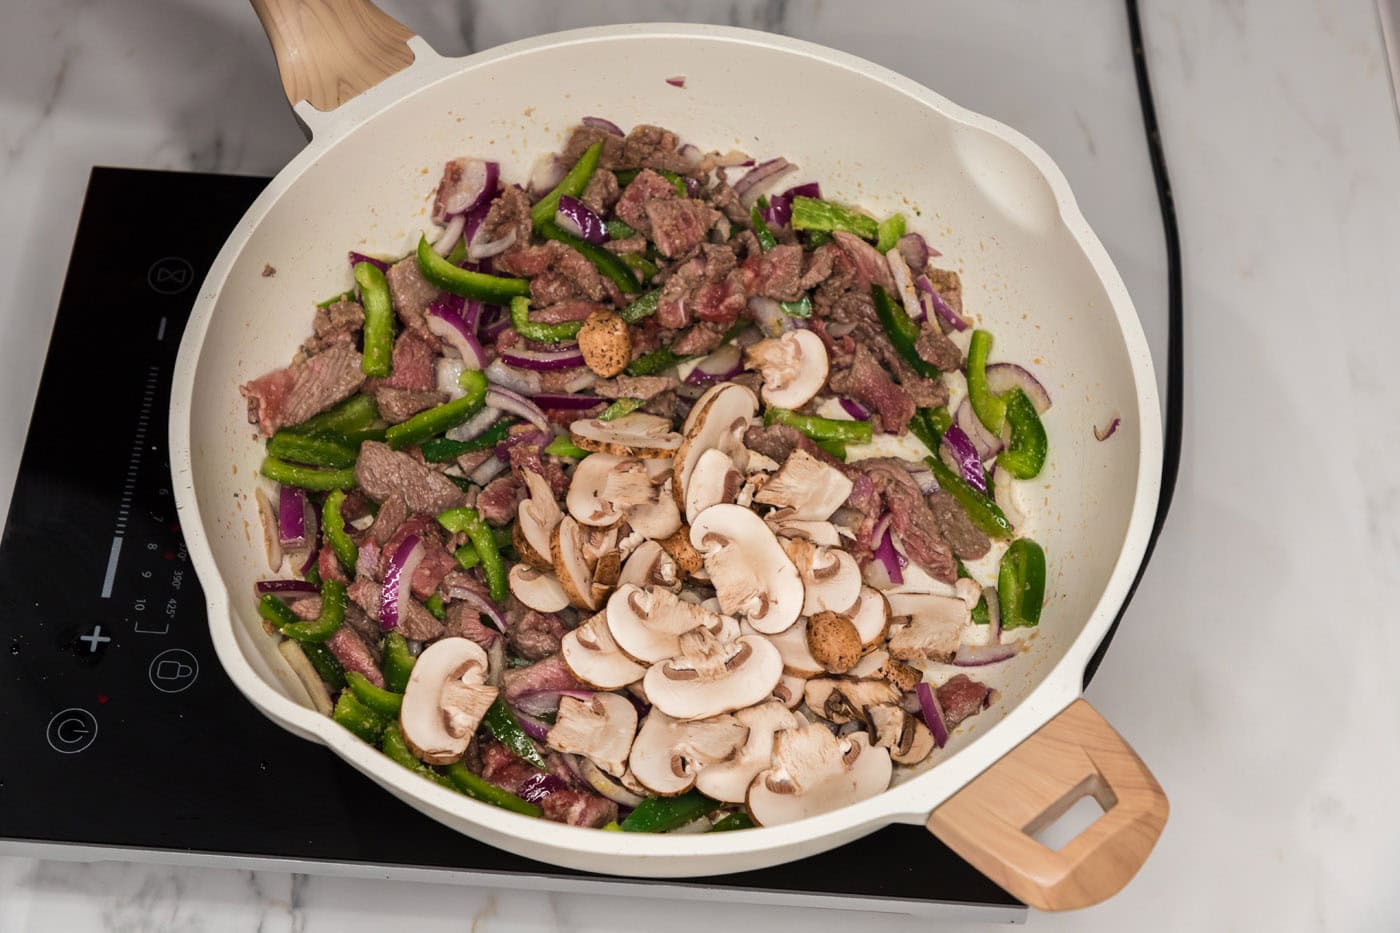 red onion, mushrooms, green bell peppers, and sliced steak in a skillet